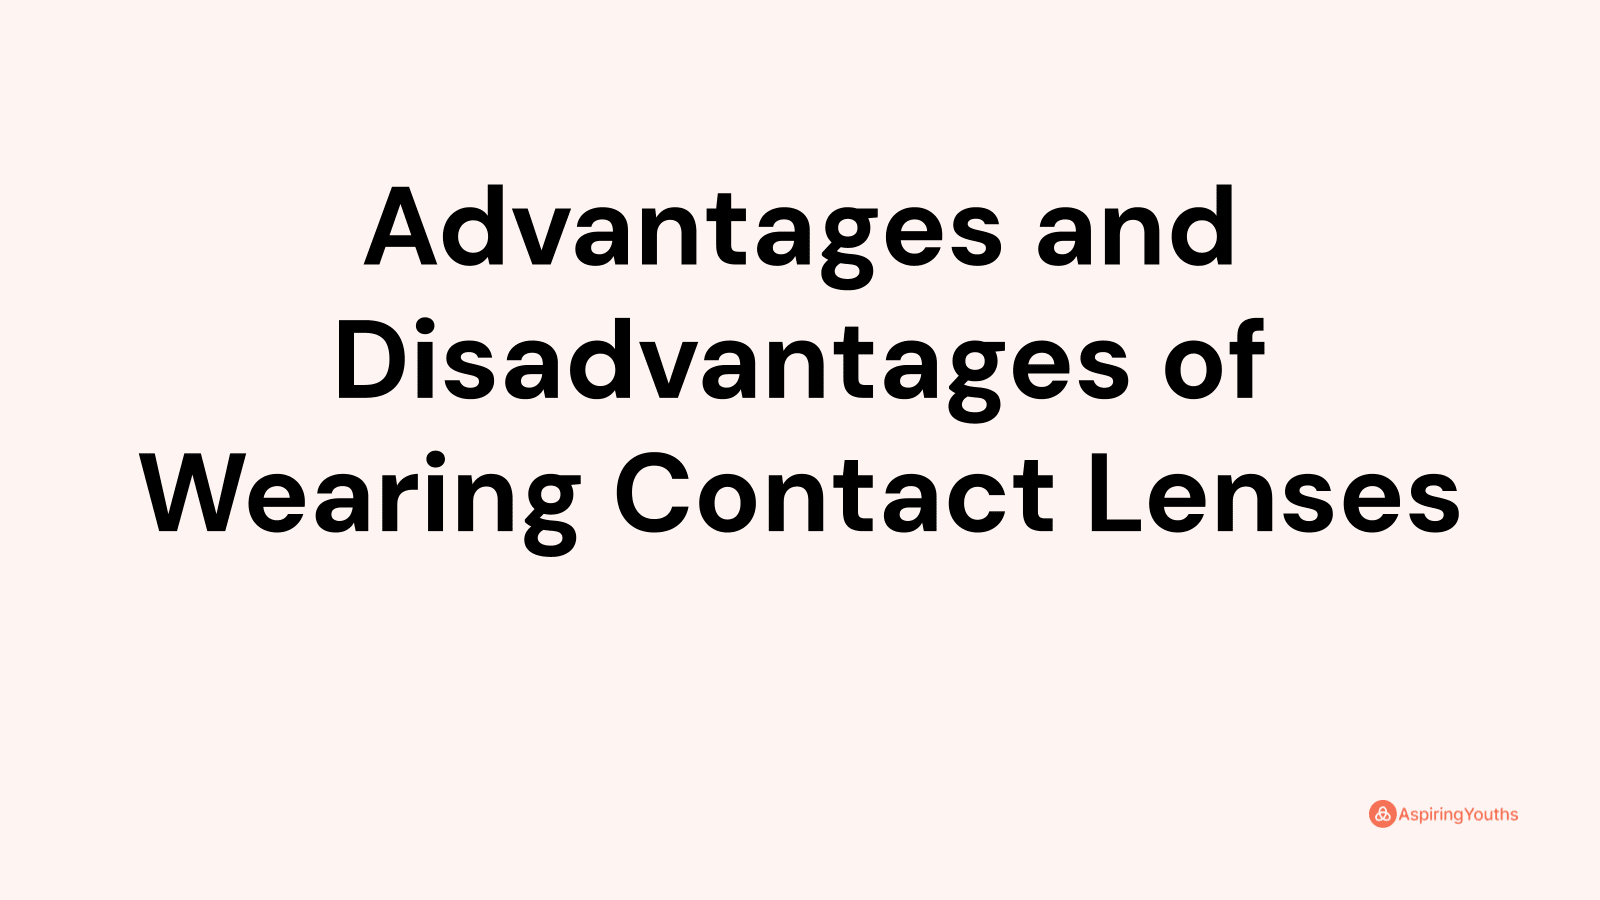 Advantages and disadvantages of Wearing Contact Lenses